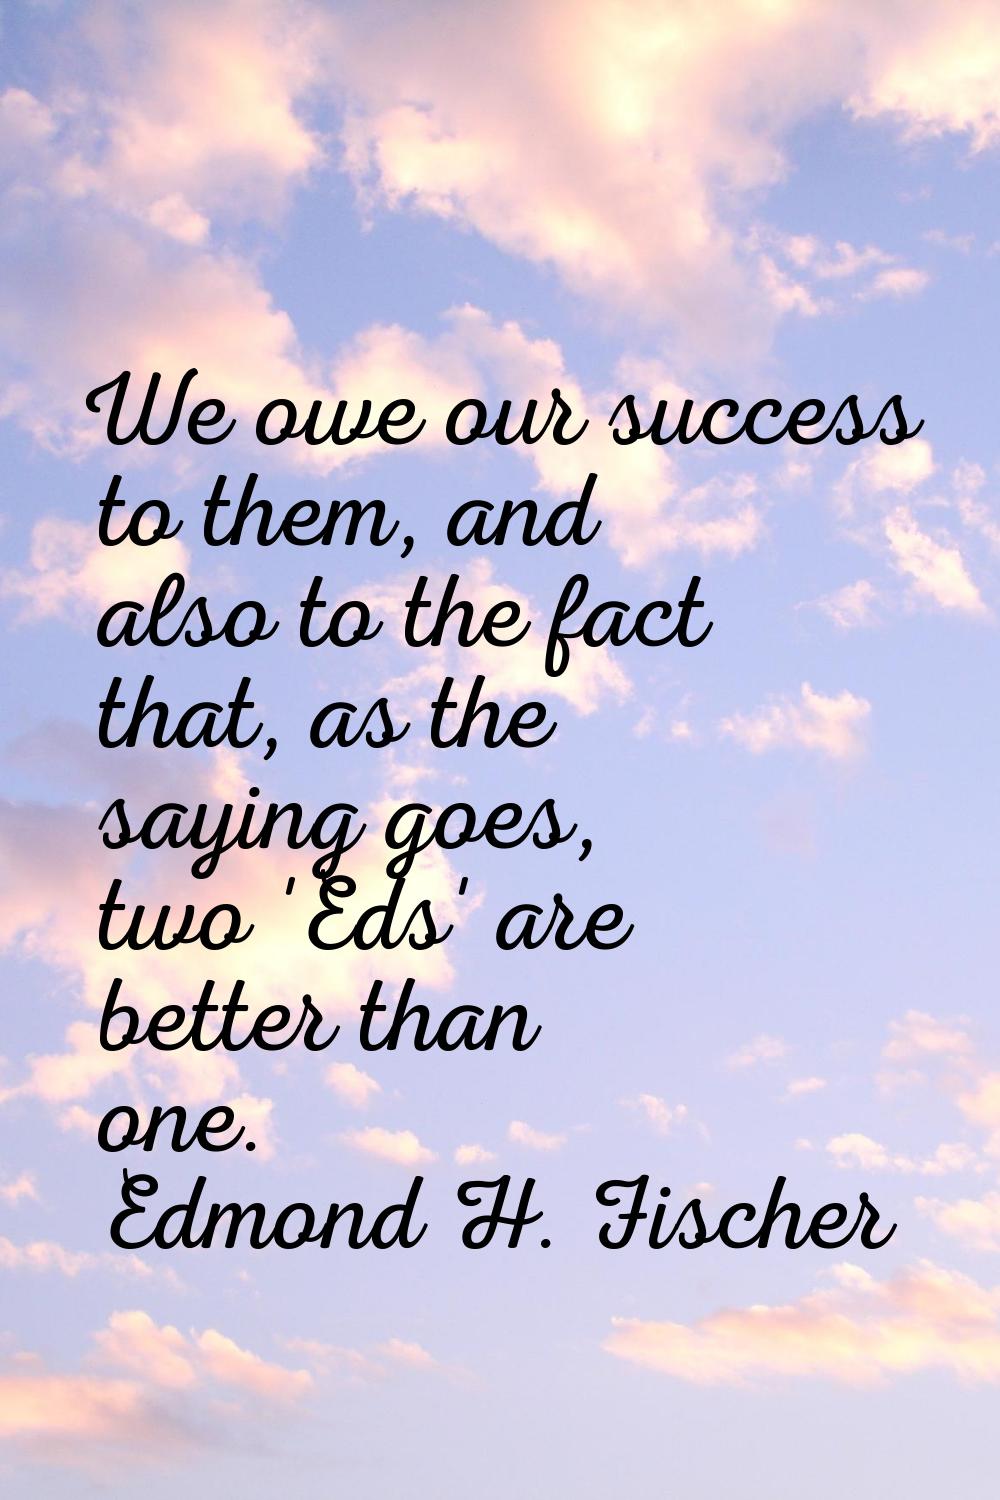 We owe our success to them, and also to the fact that, as the saying goes, two 'Eds' are better tha